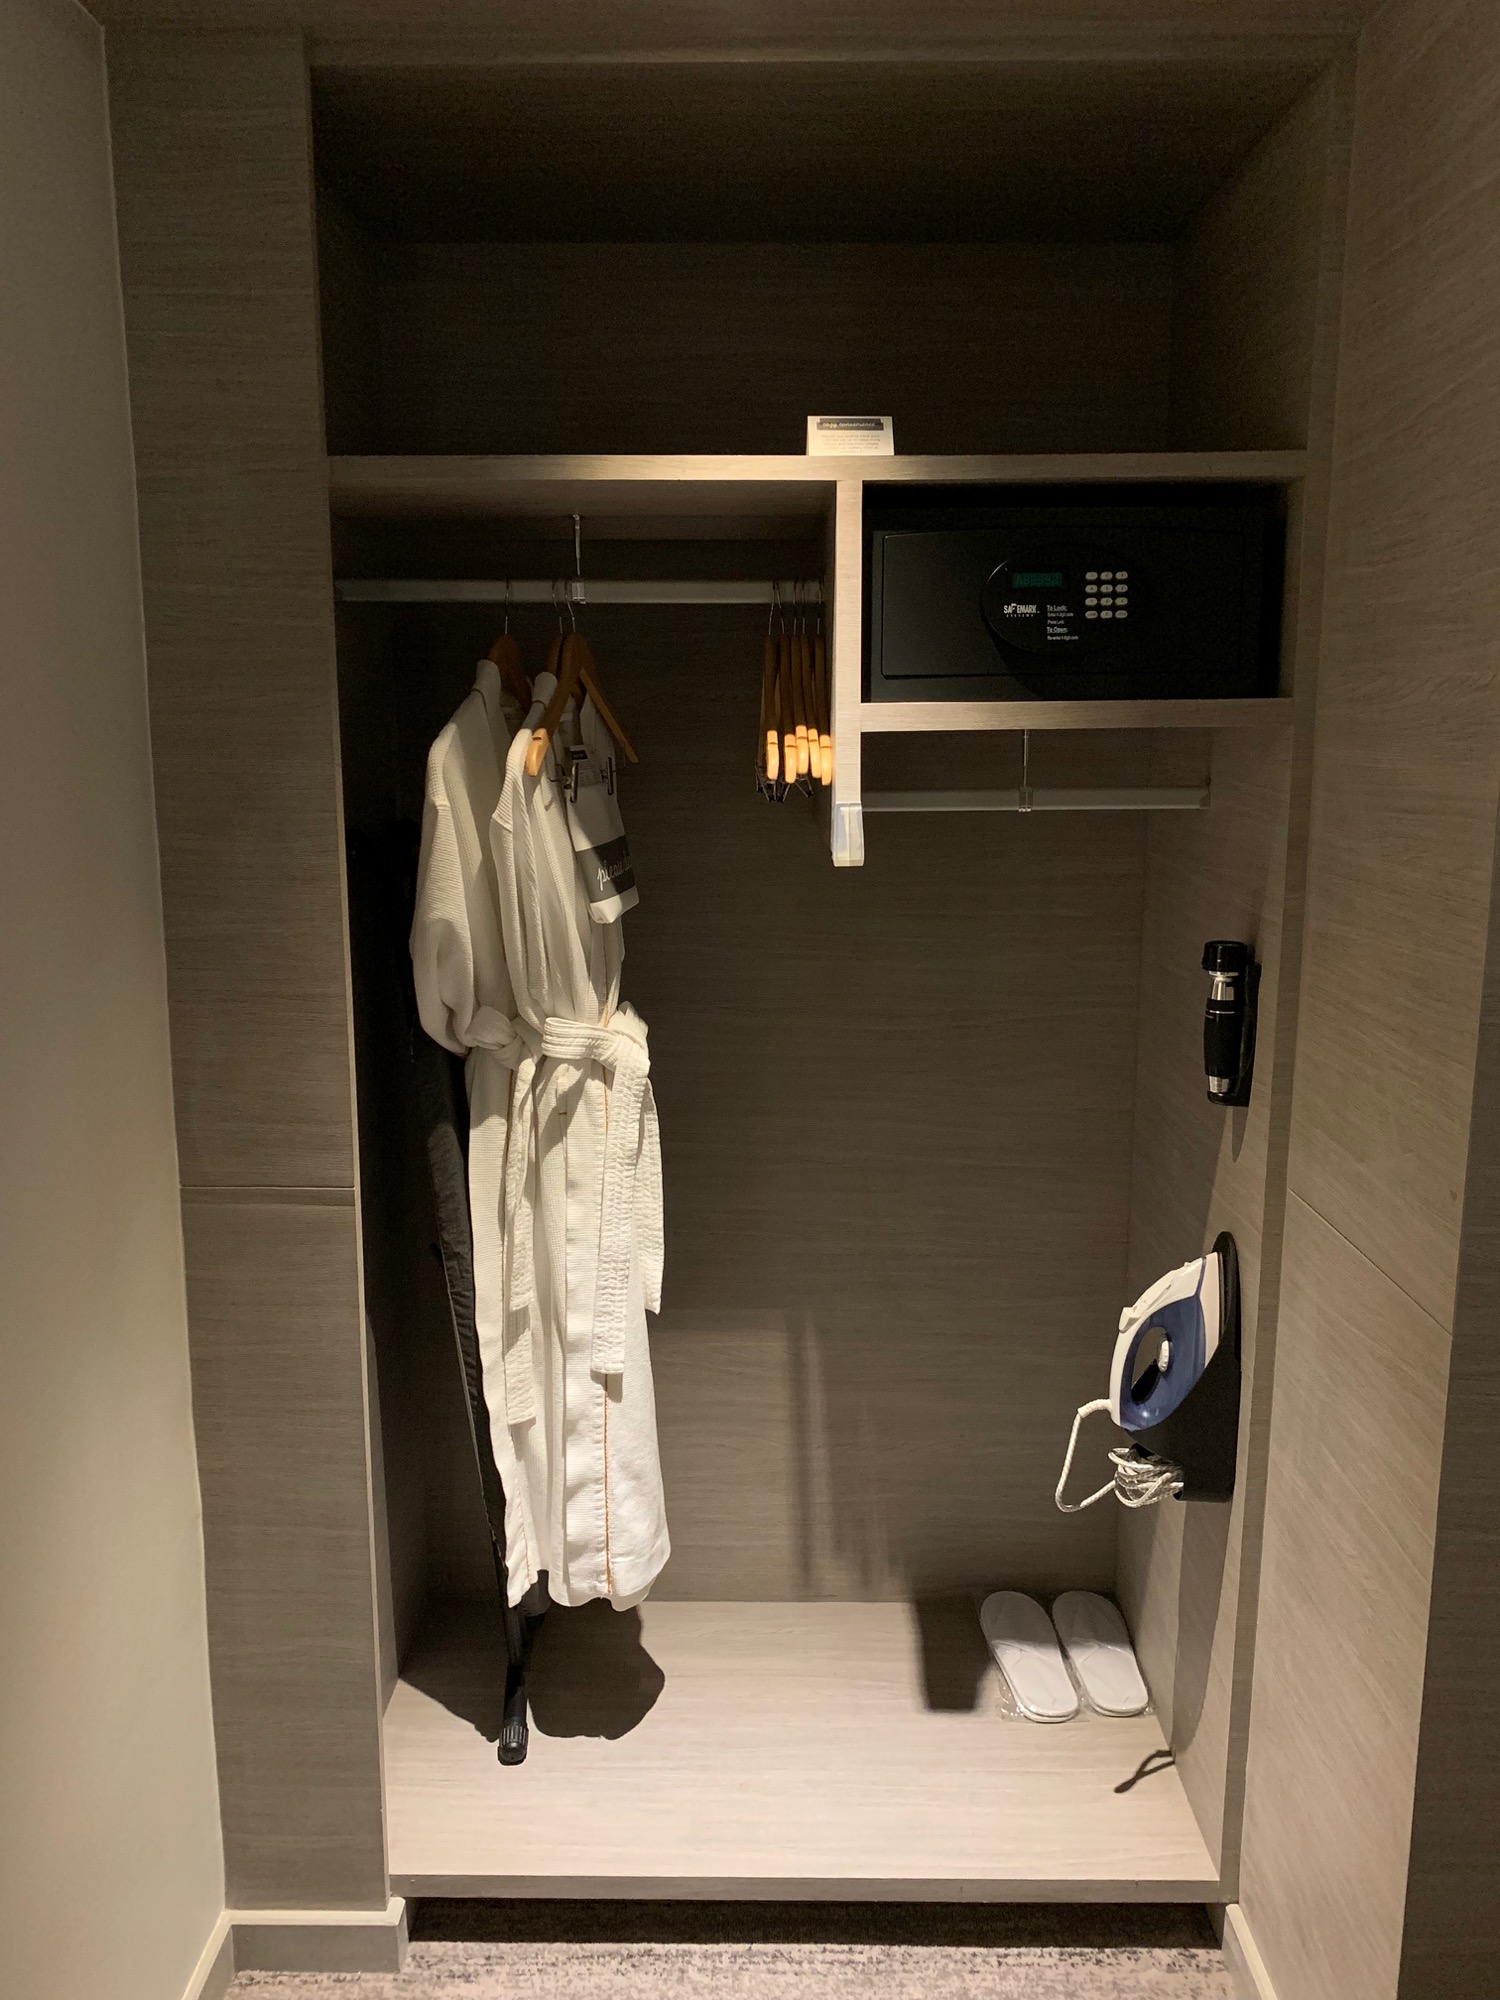 a closet with white bathrobes and a small microwave